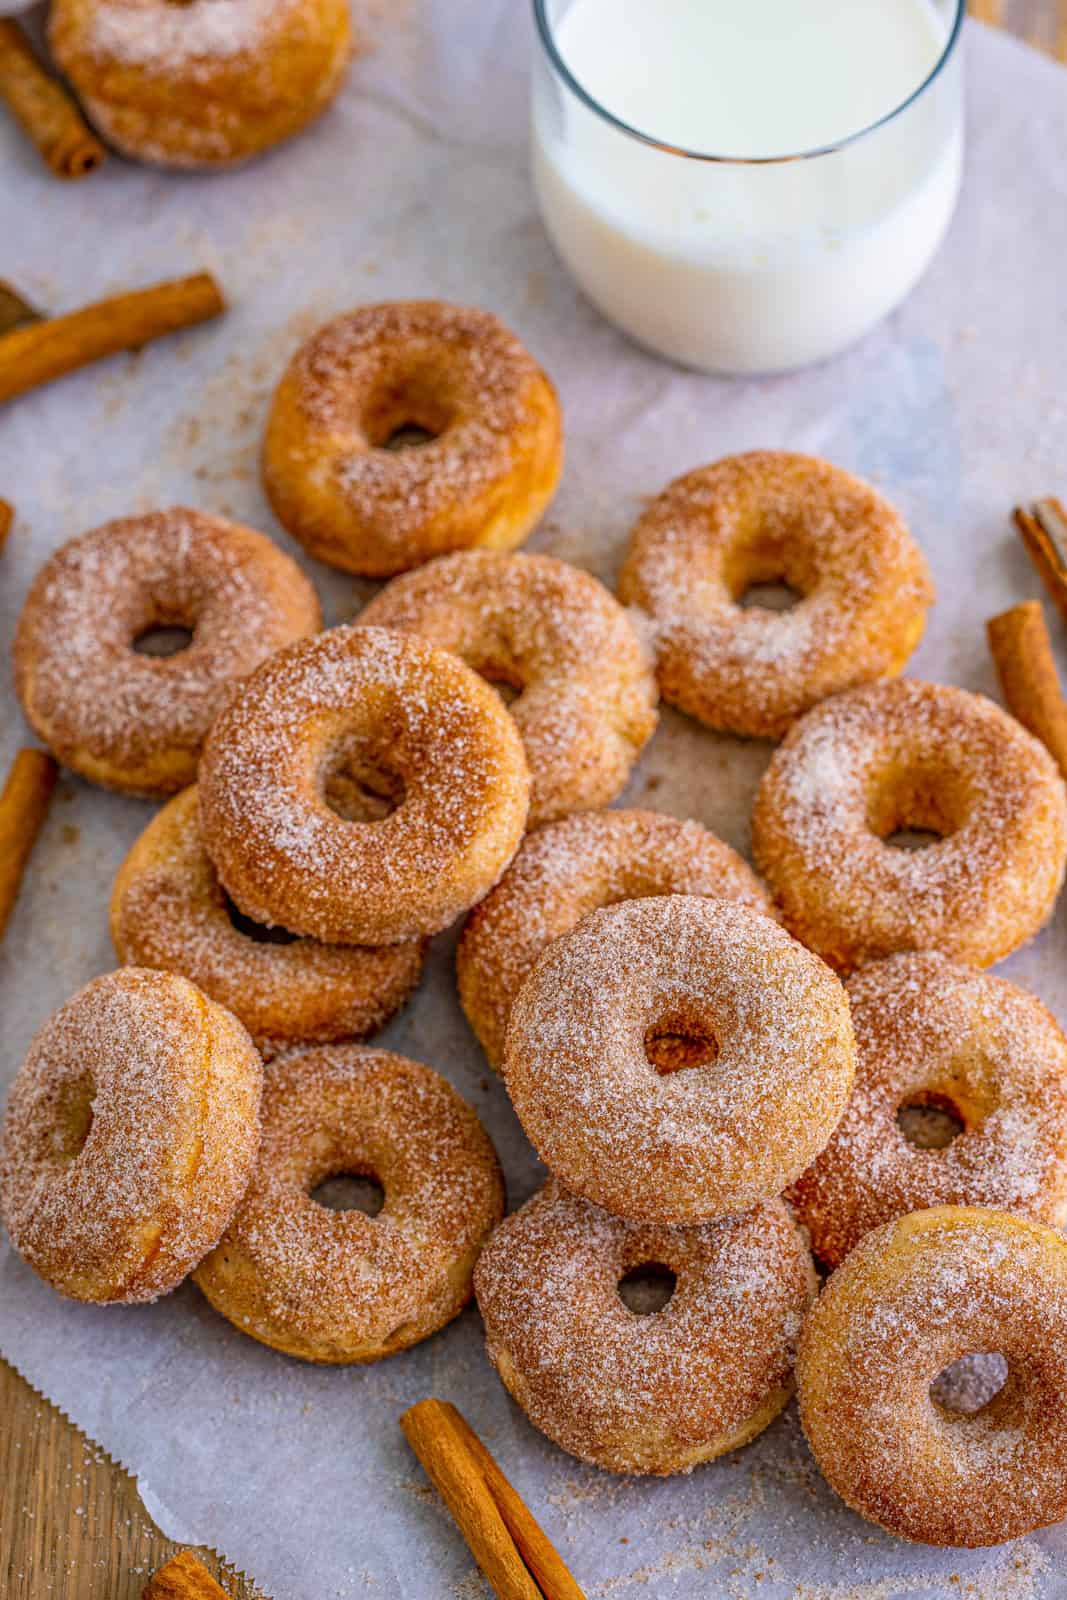 Overhead photo of layered and stacked Cinnamon Sugar Mini Donuts on parchment paper with milk.